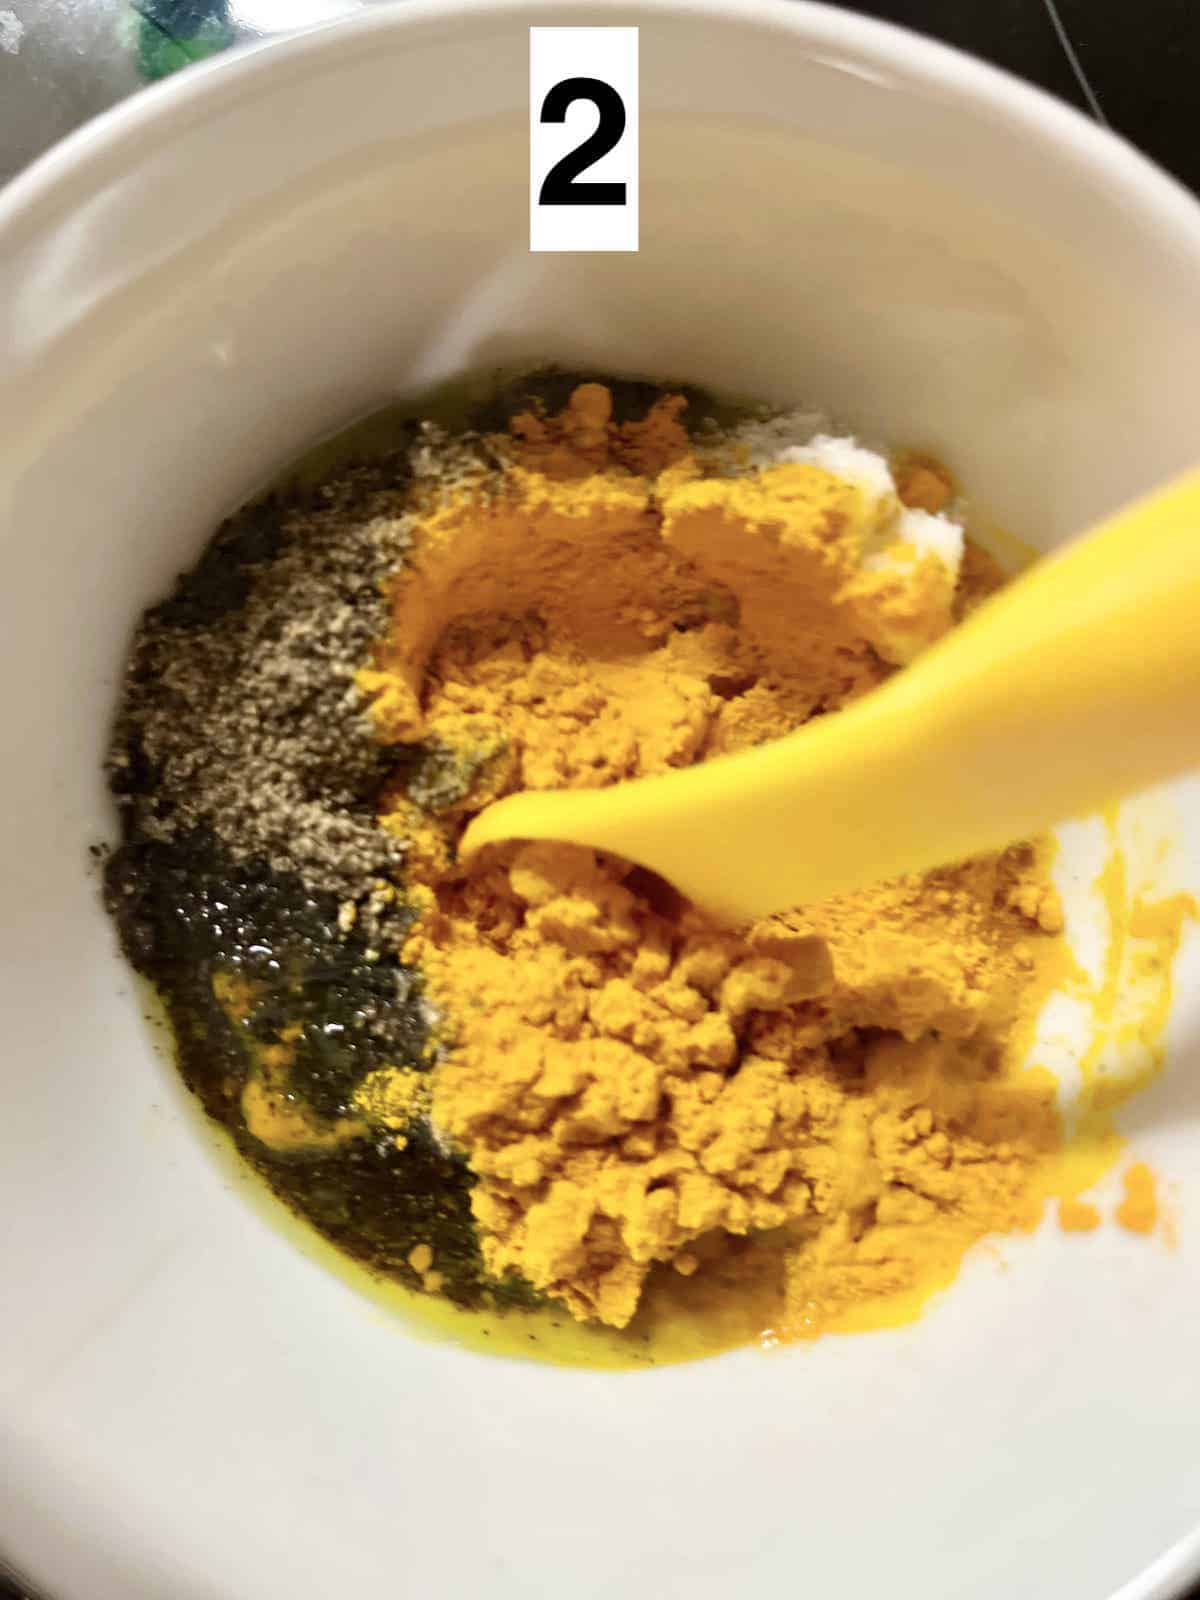 Mixing ground pepper, ground turmeric, salt, lime juice and olive oil.